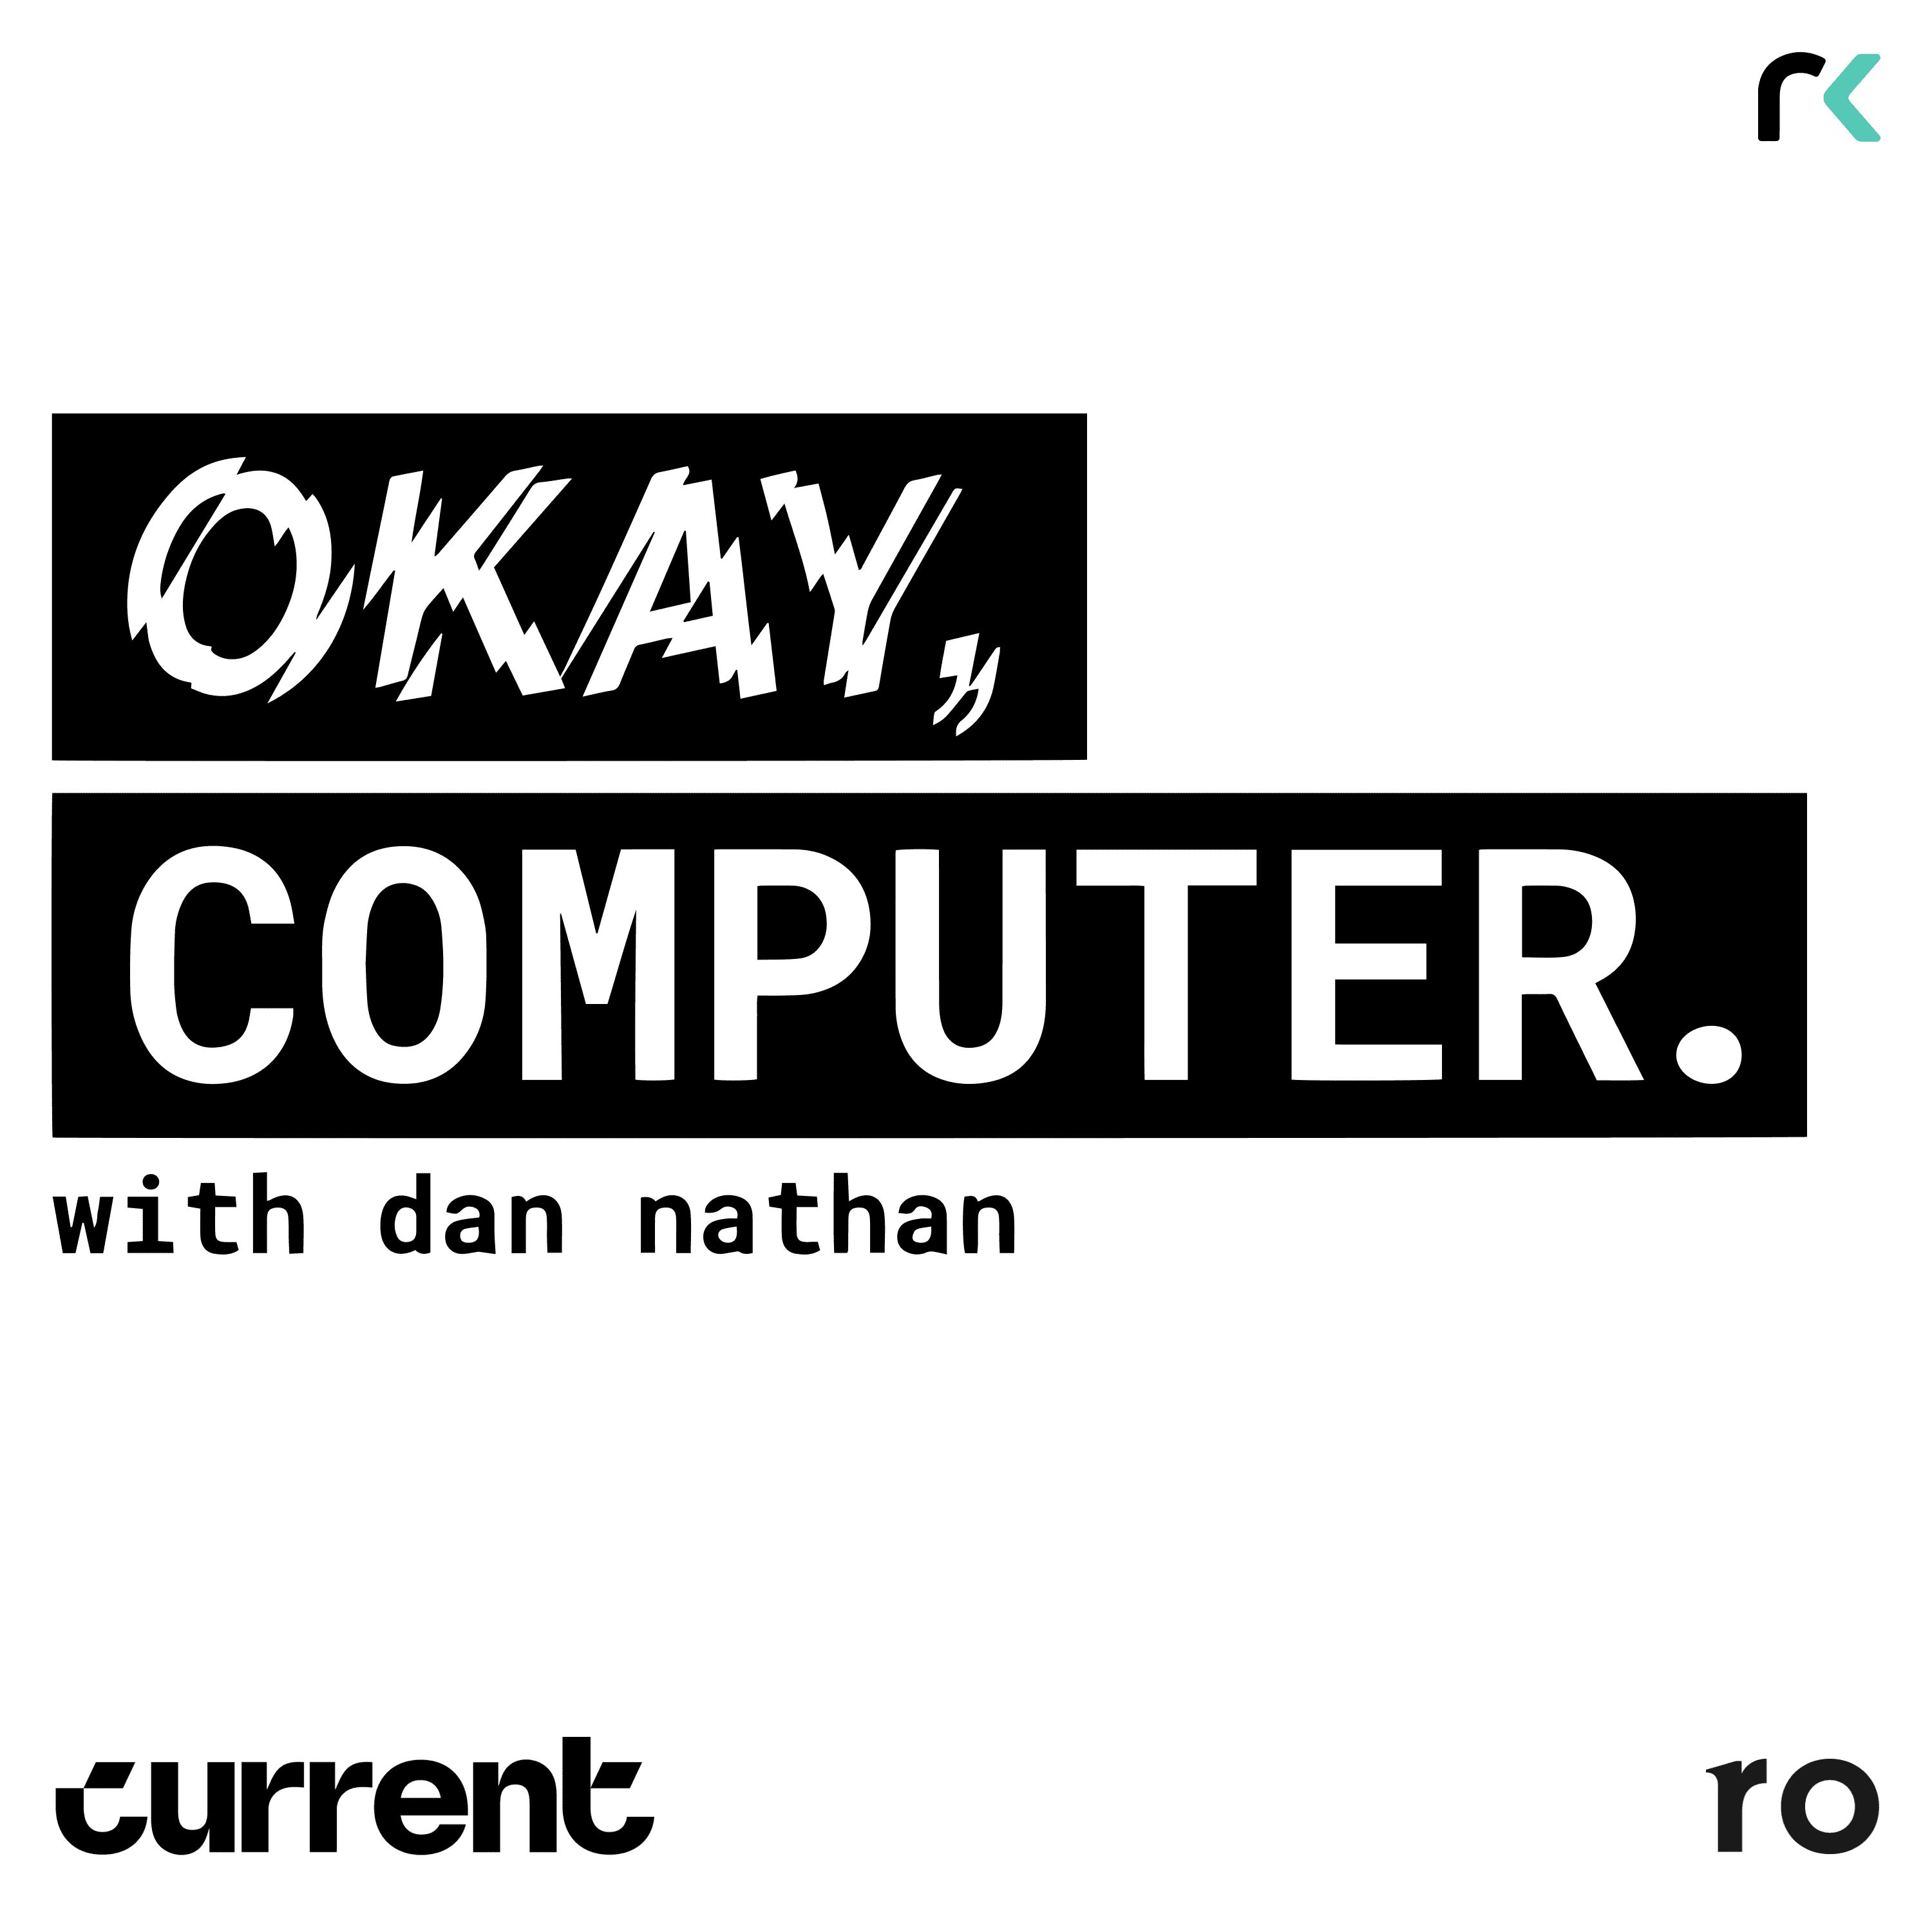 Okay, Computer. Podcast: Pop Goes the IPO with Deirdre Bosa, Katie Stanton and Kwin Kramer of Daily